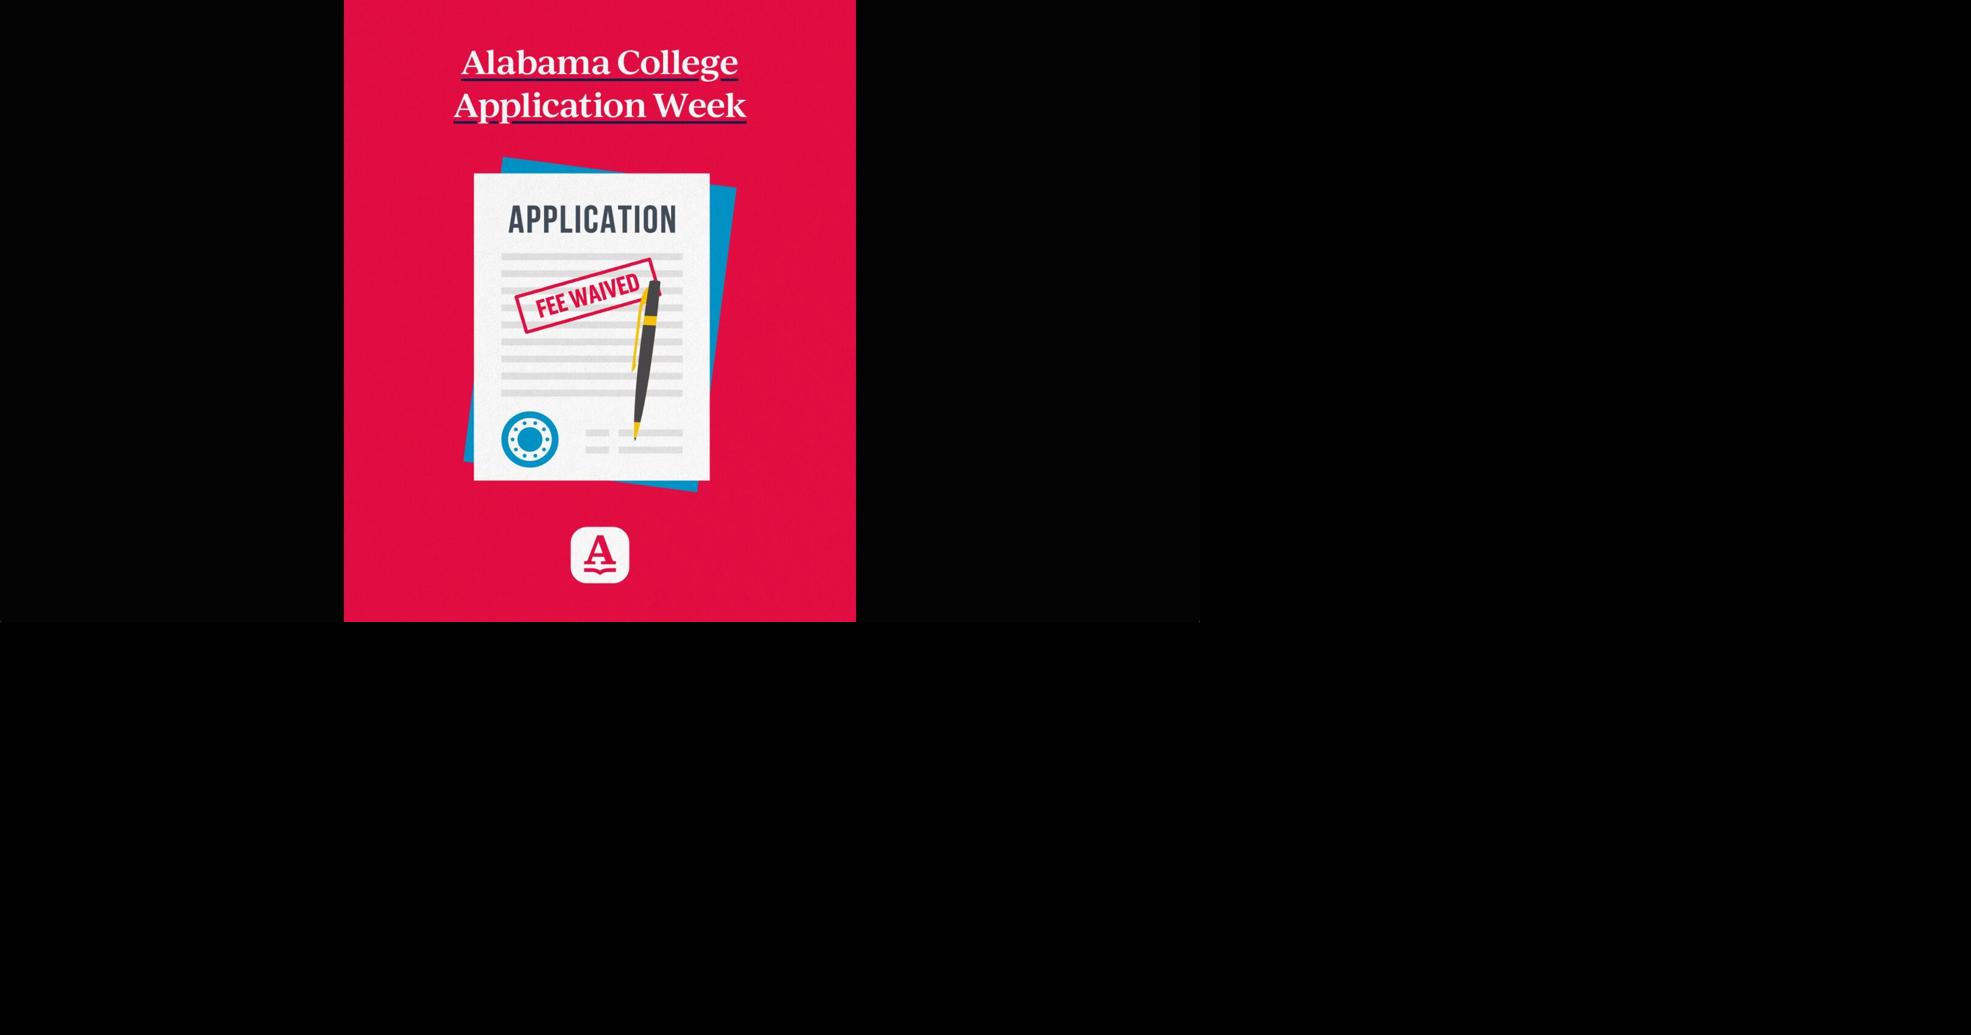 Alabama Students Can Apply to College This Week Without Fees October 17